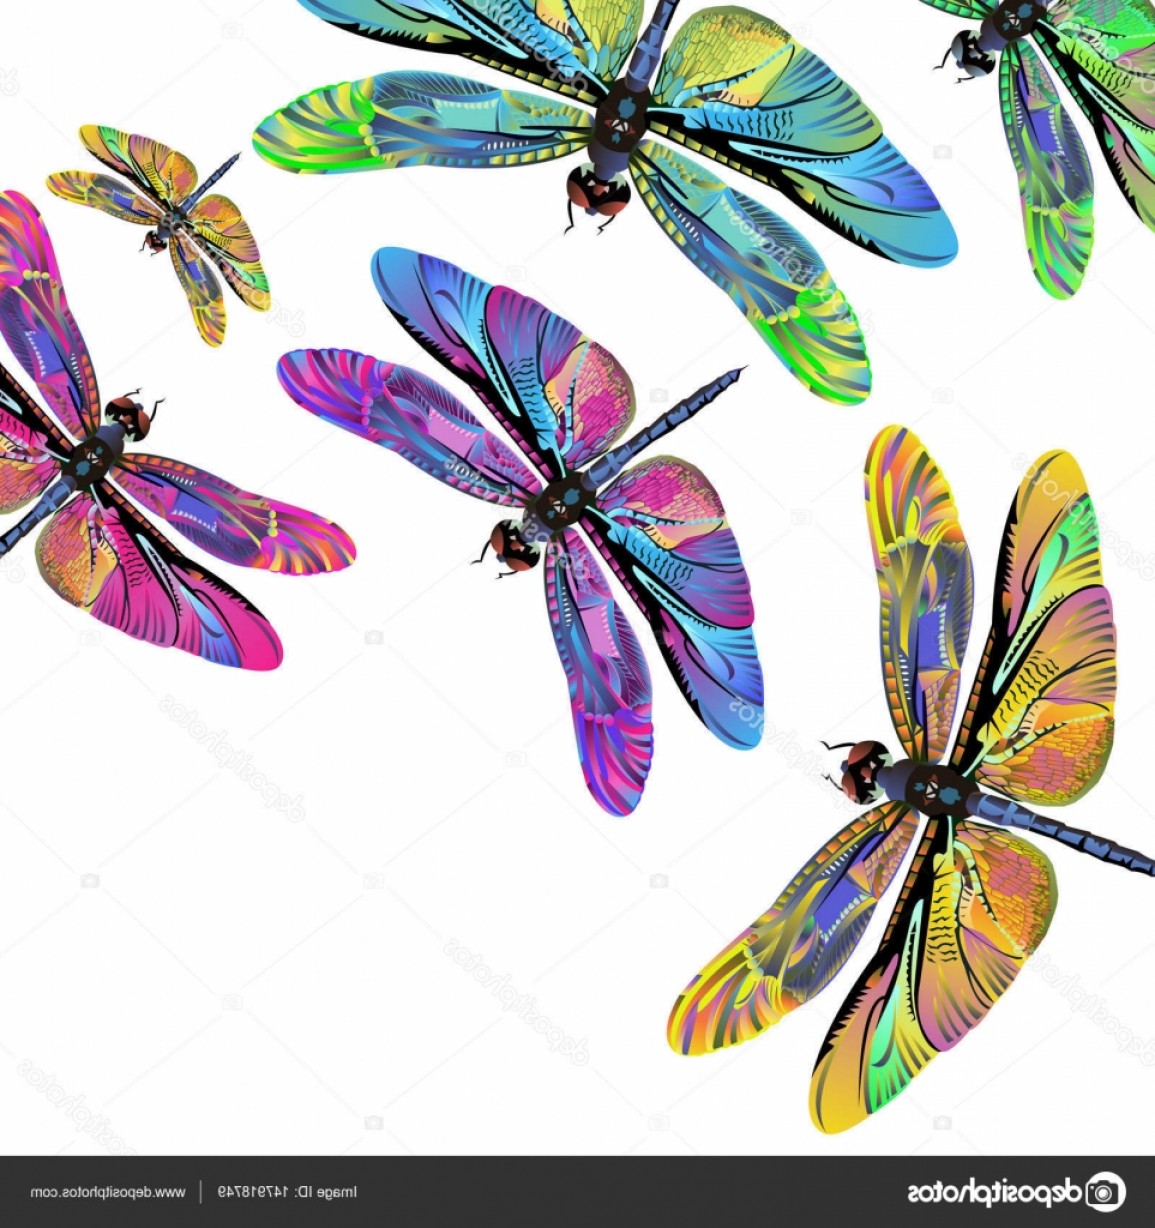 Dragonfly Vector Art at Free for